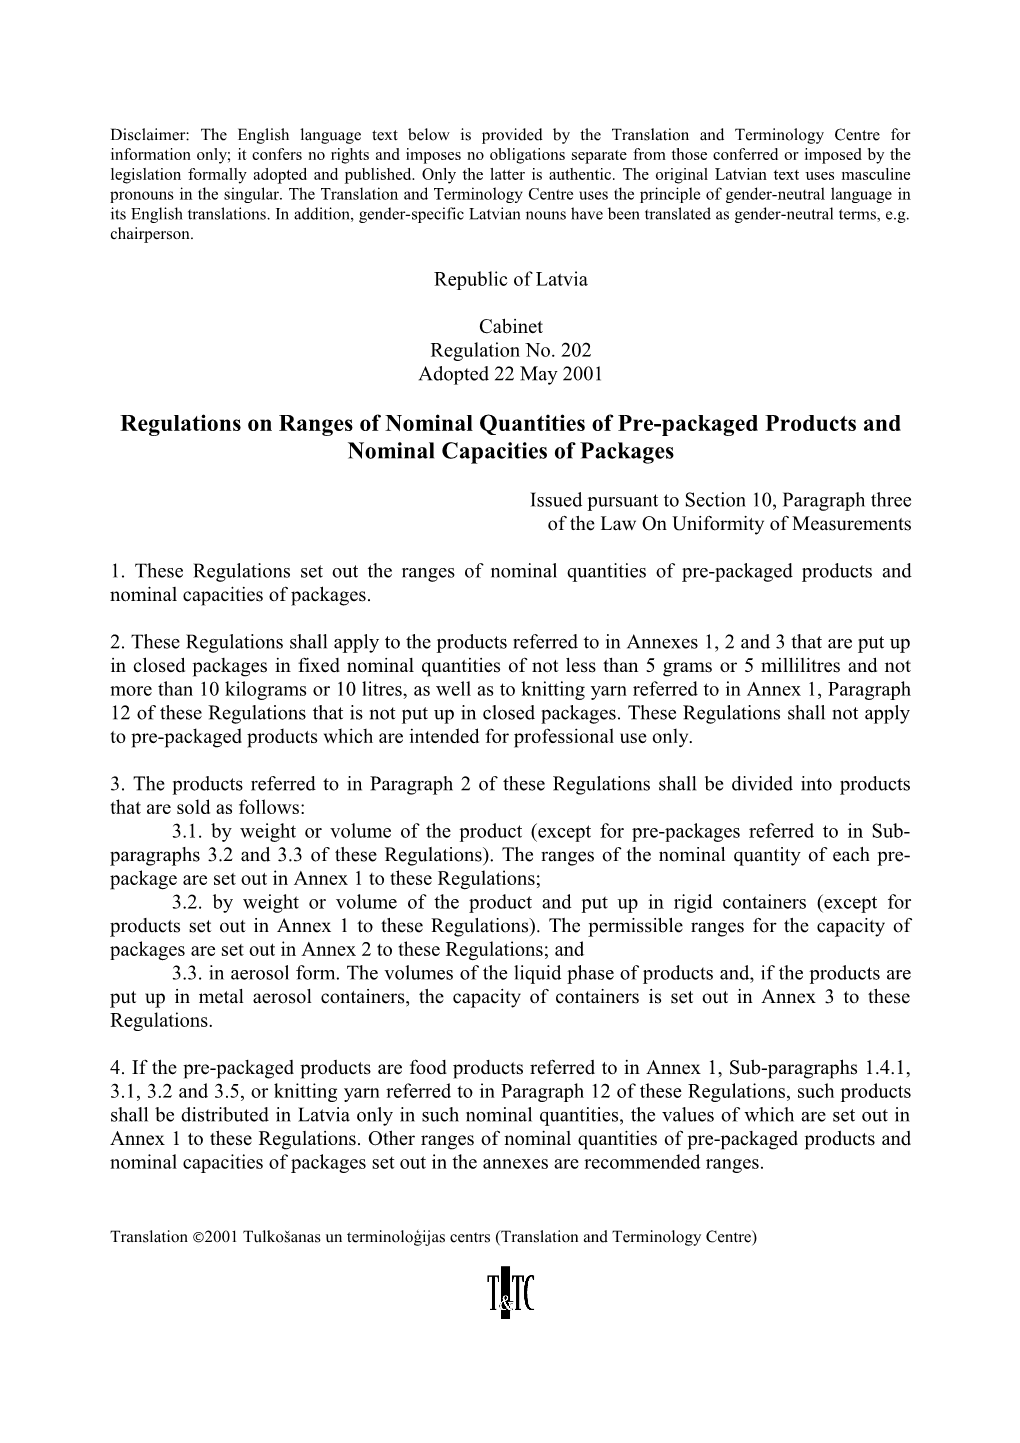 Regulations on Ranges of Nominal Quantities of Pre-Packaged Products and Nominal Capacities